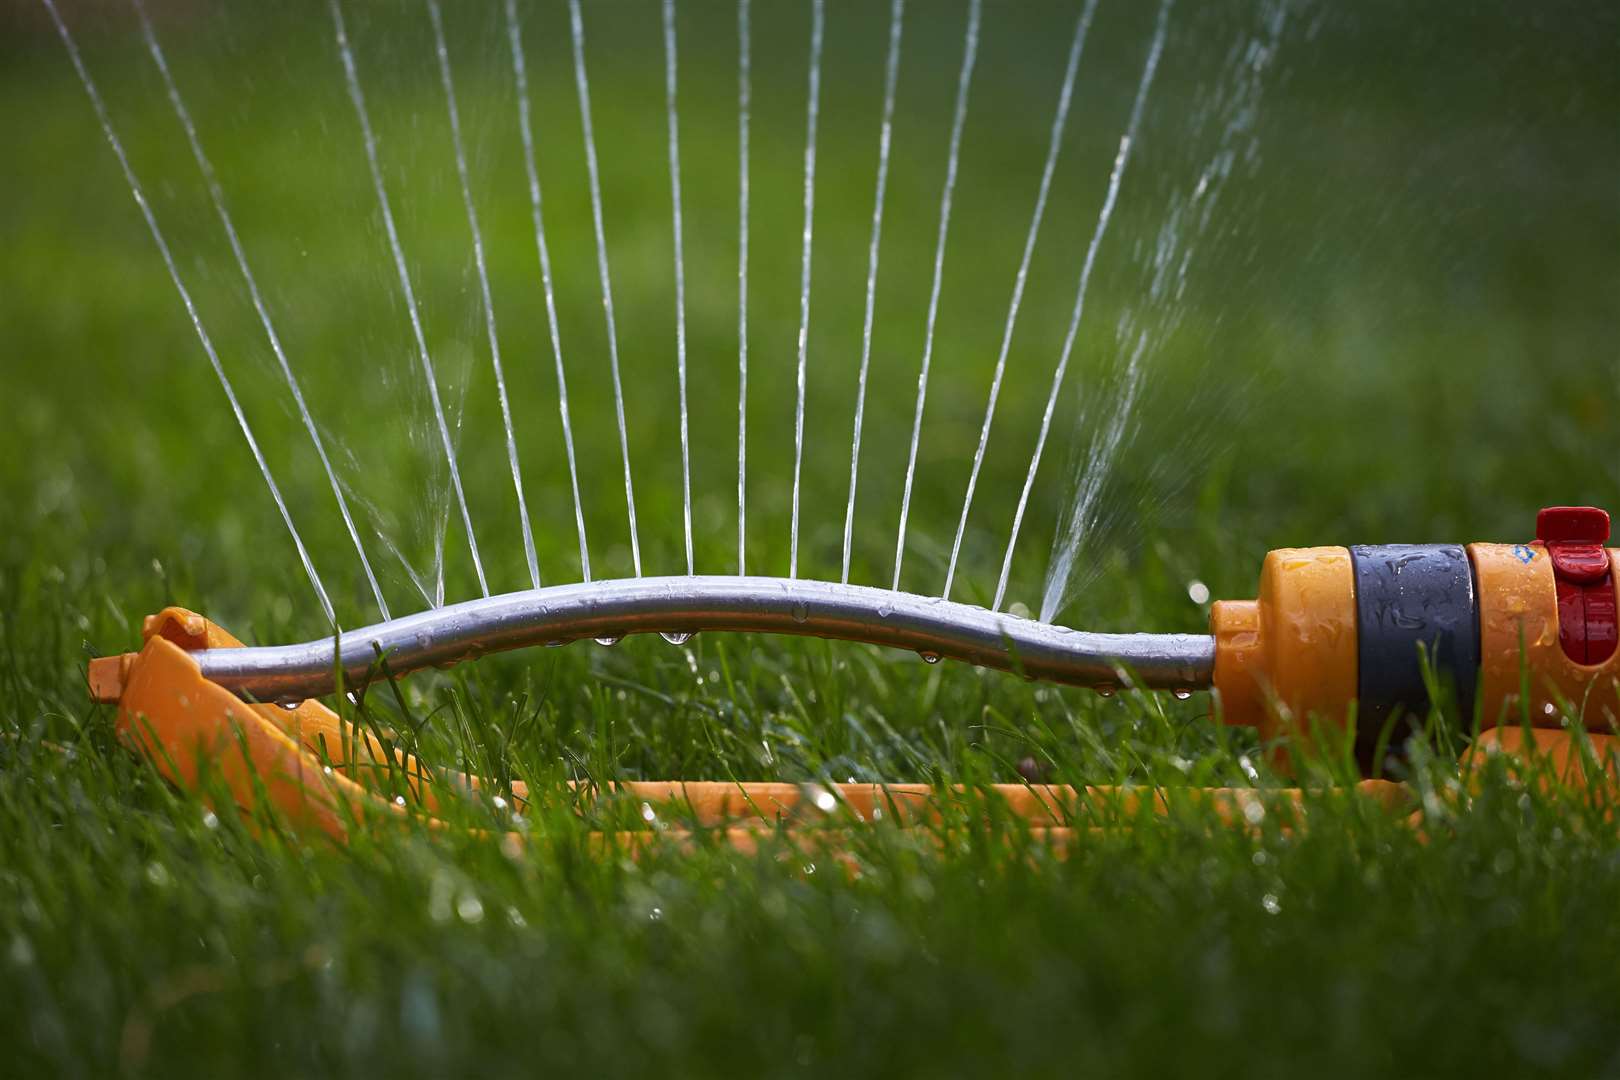 Sprinklers are not allowed to be used during the hosepipe ban. PA stock image